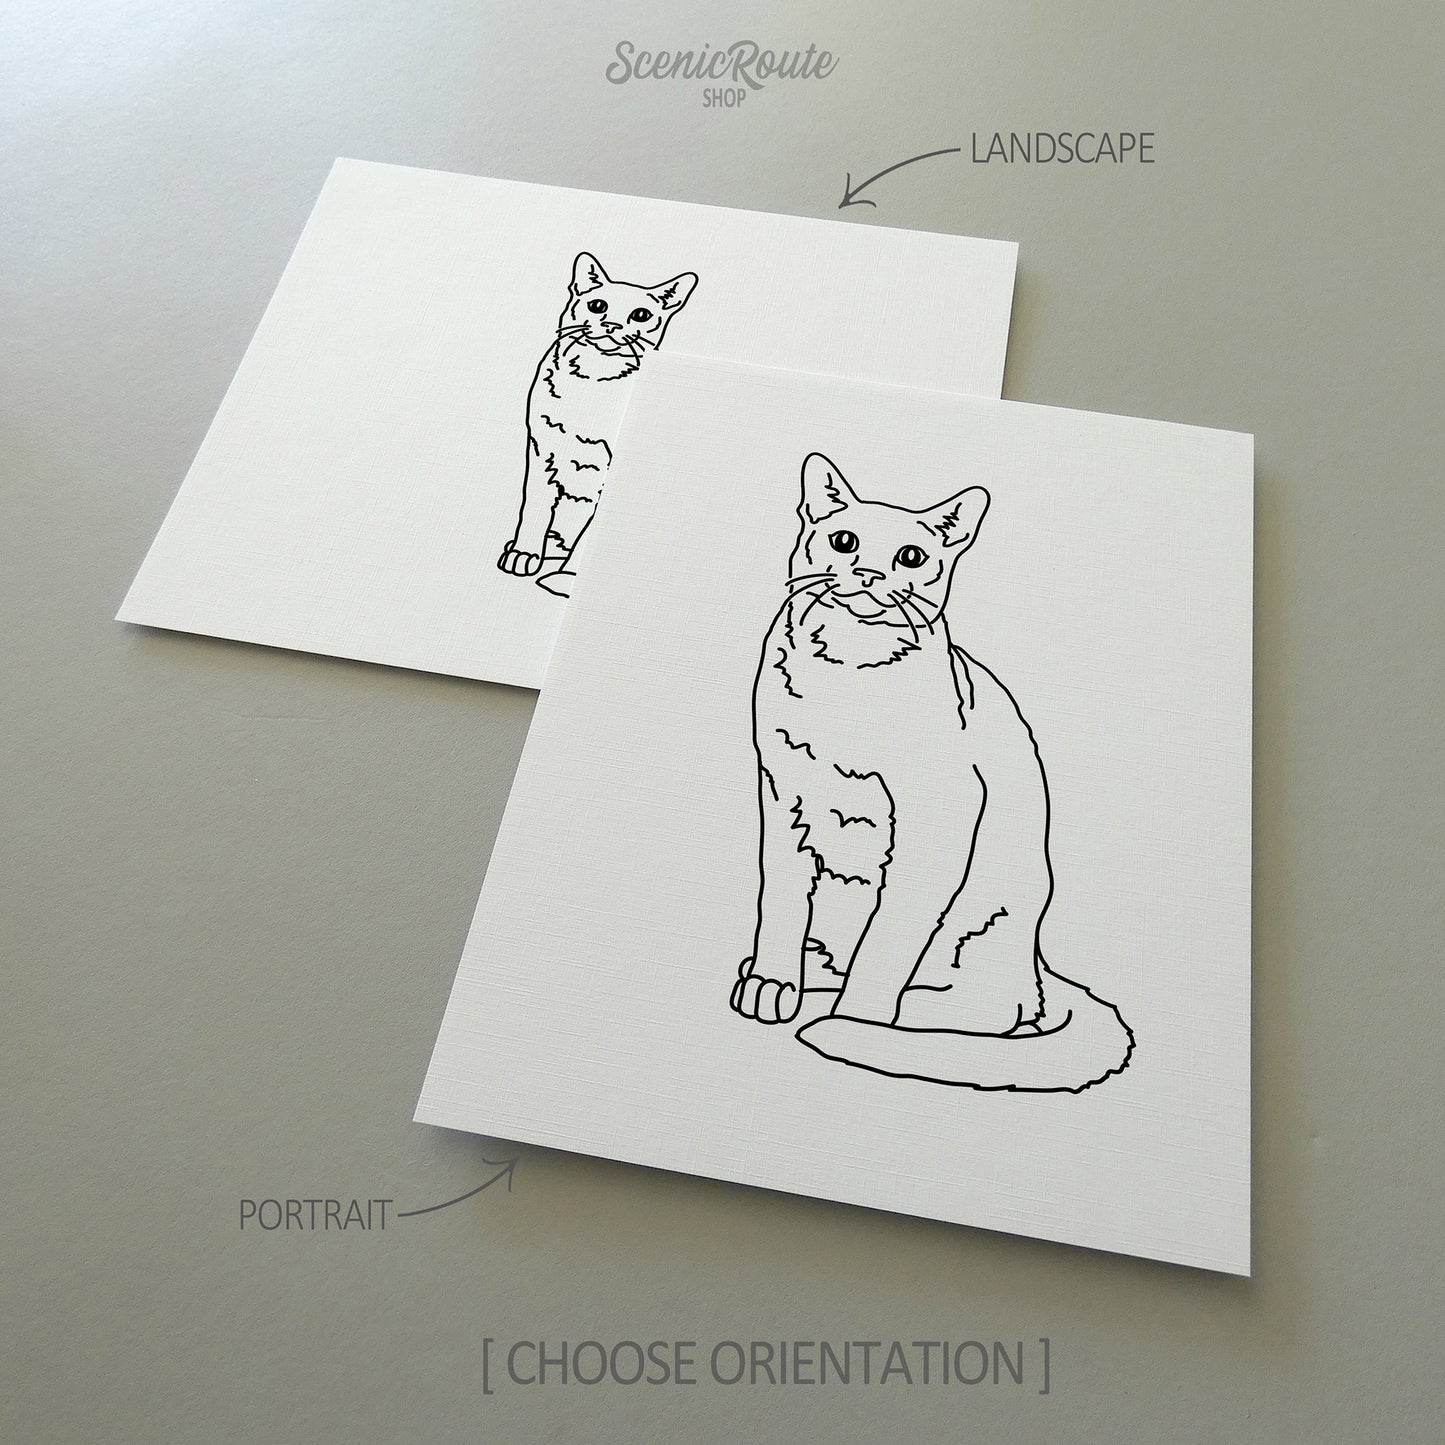 Two line art drawings of a Russian Blue cat on white linen paper with a gray background.  The pieces are shown in portrait and landscape orientation for the available art print options.